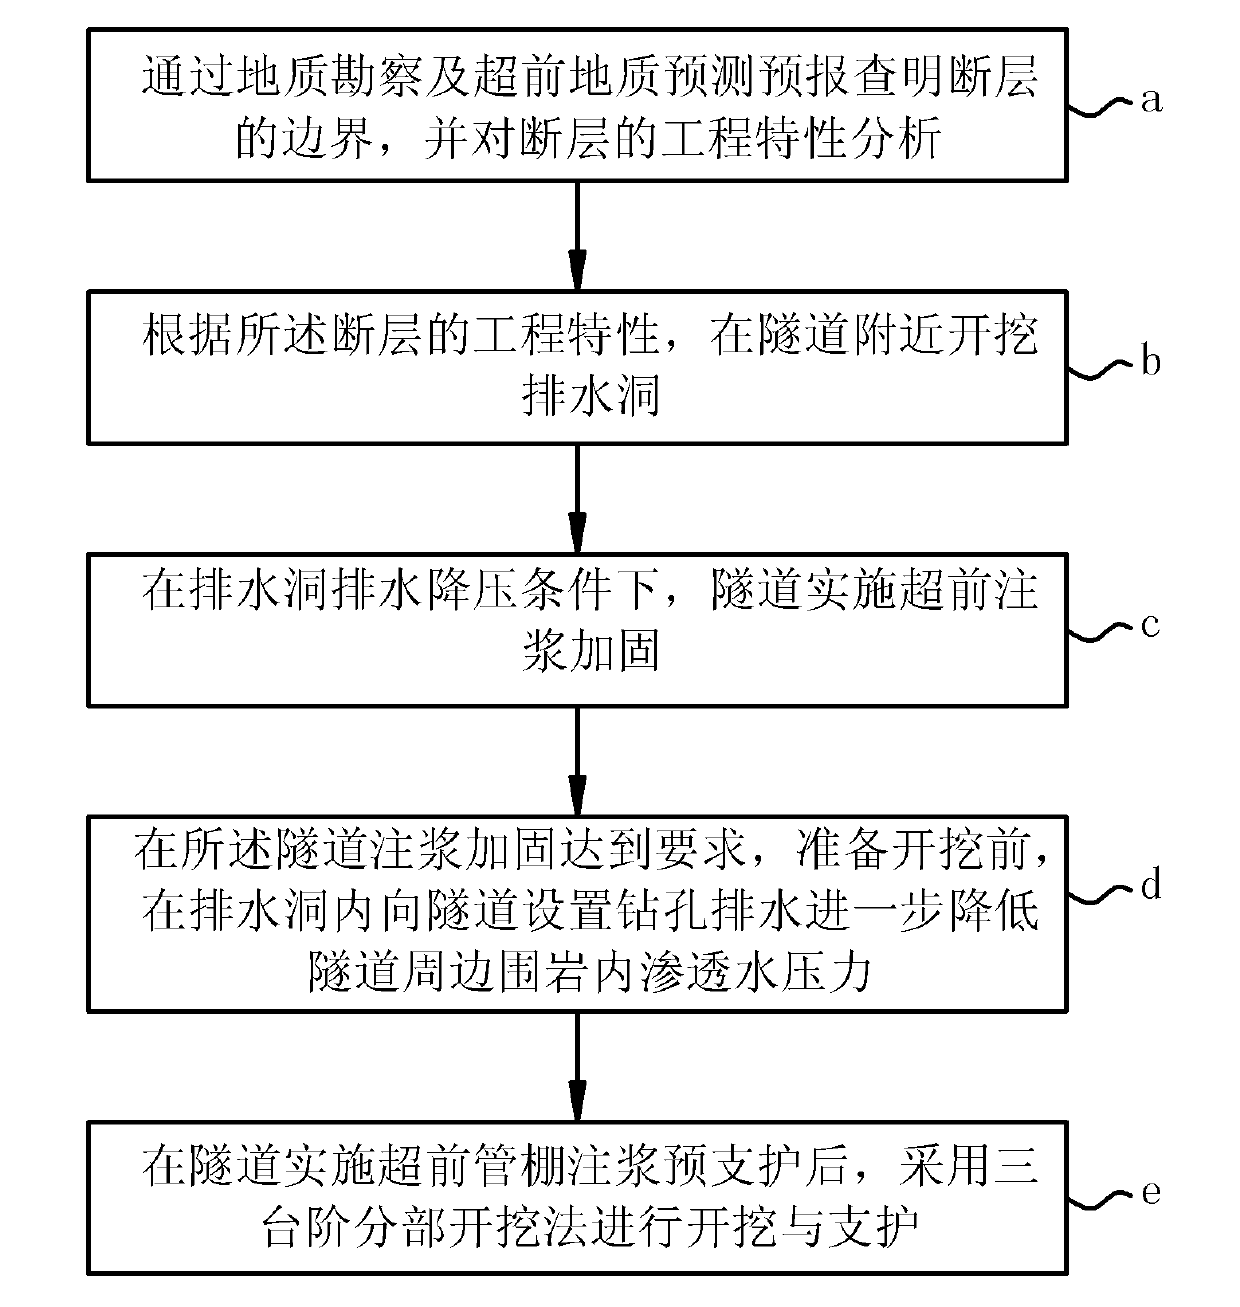 Fault processing method of high pressure water enrichment area